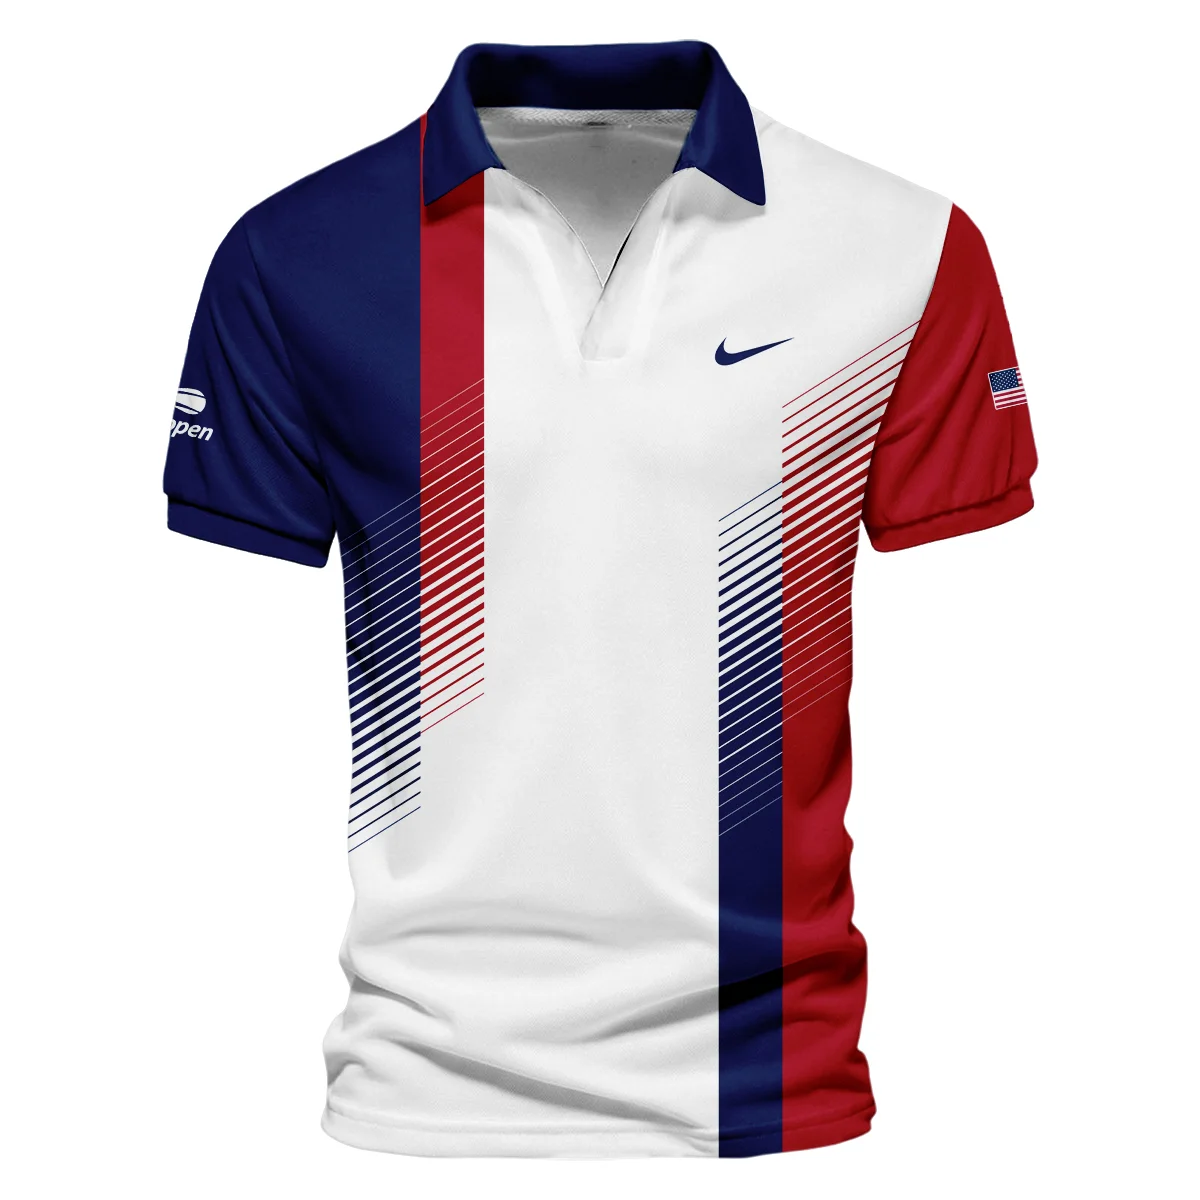 Nike Blue Red Straight Line White US Open Tennis Champions Vneck Polo Shirt Style Classic Polo Shirt For Men